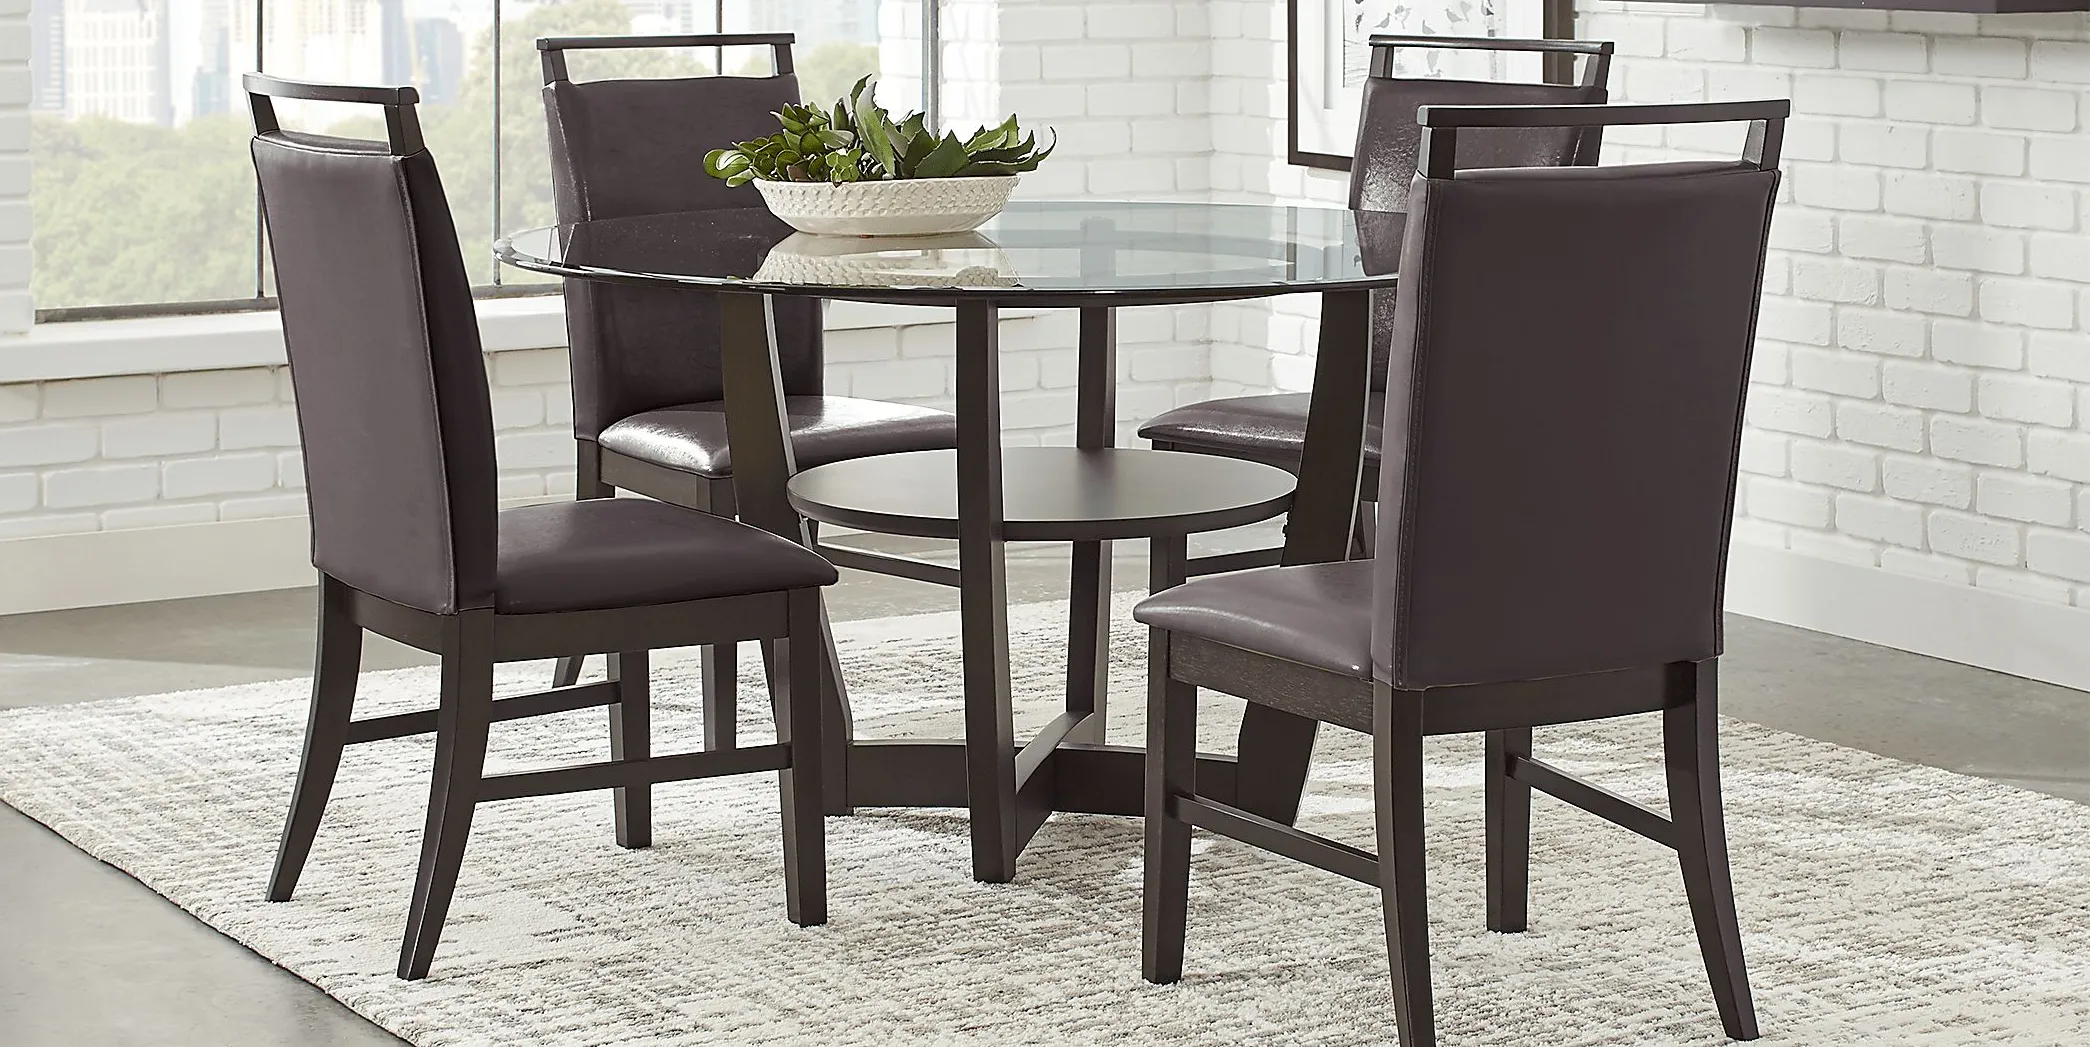 Ciara Espresso 5 Pc 48"" Round Dining Set with Brown Chairs